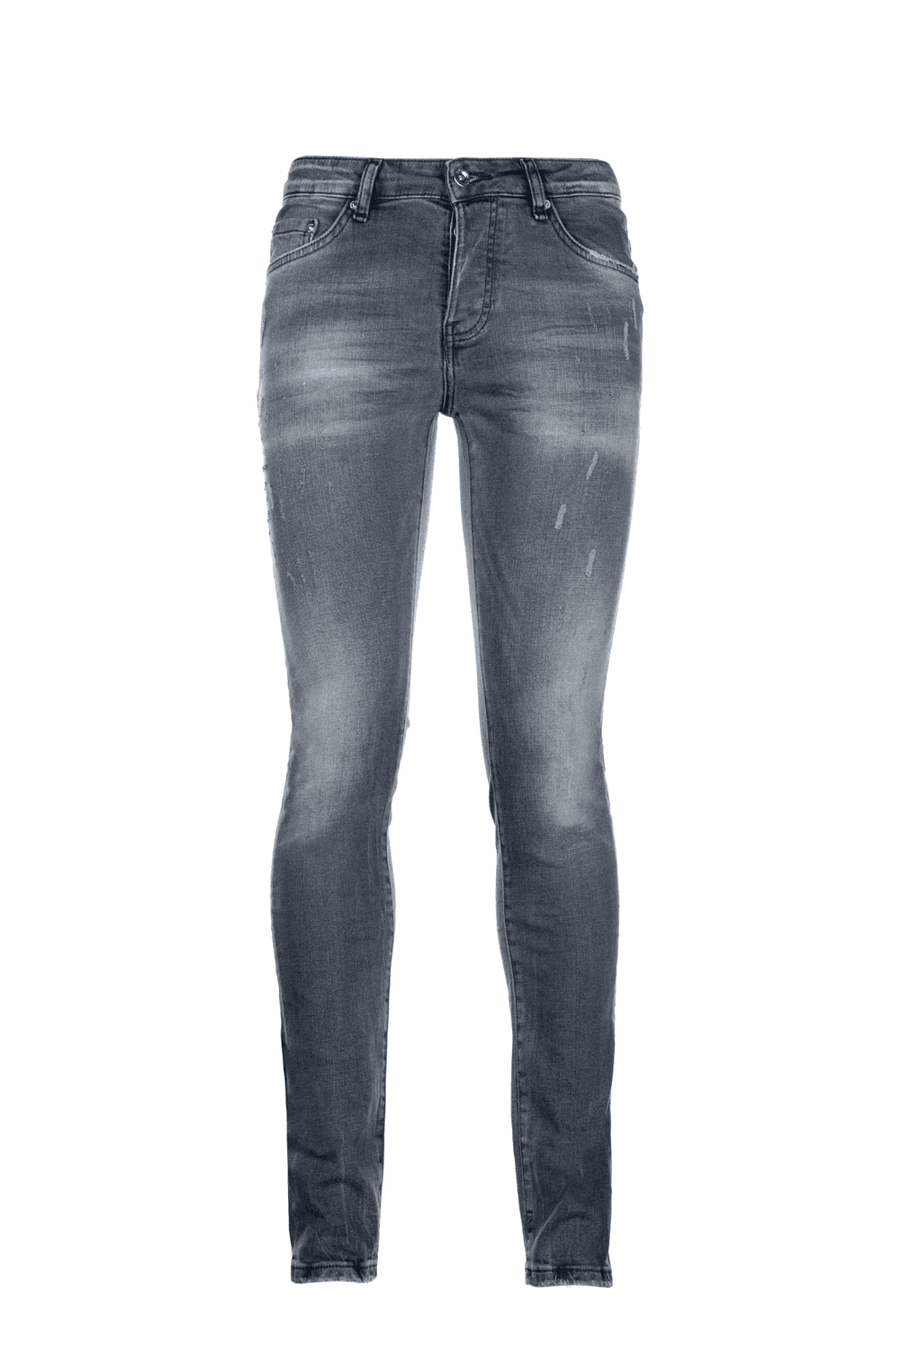 Buy the 7TH HVN Cortland Jean in Blue at Intro. Spend £50 for free UK delivery. Official stockists. We ship worldwide.